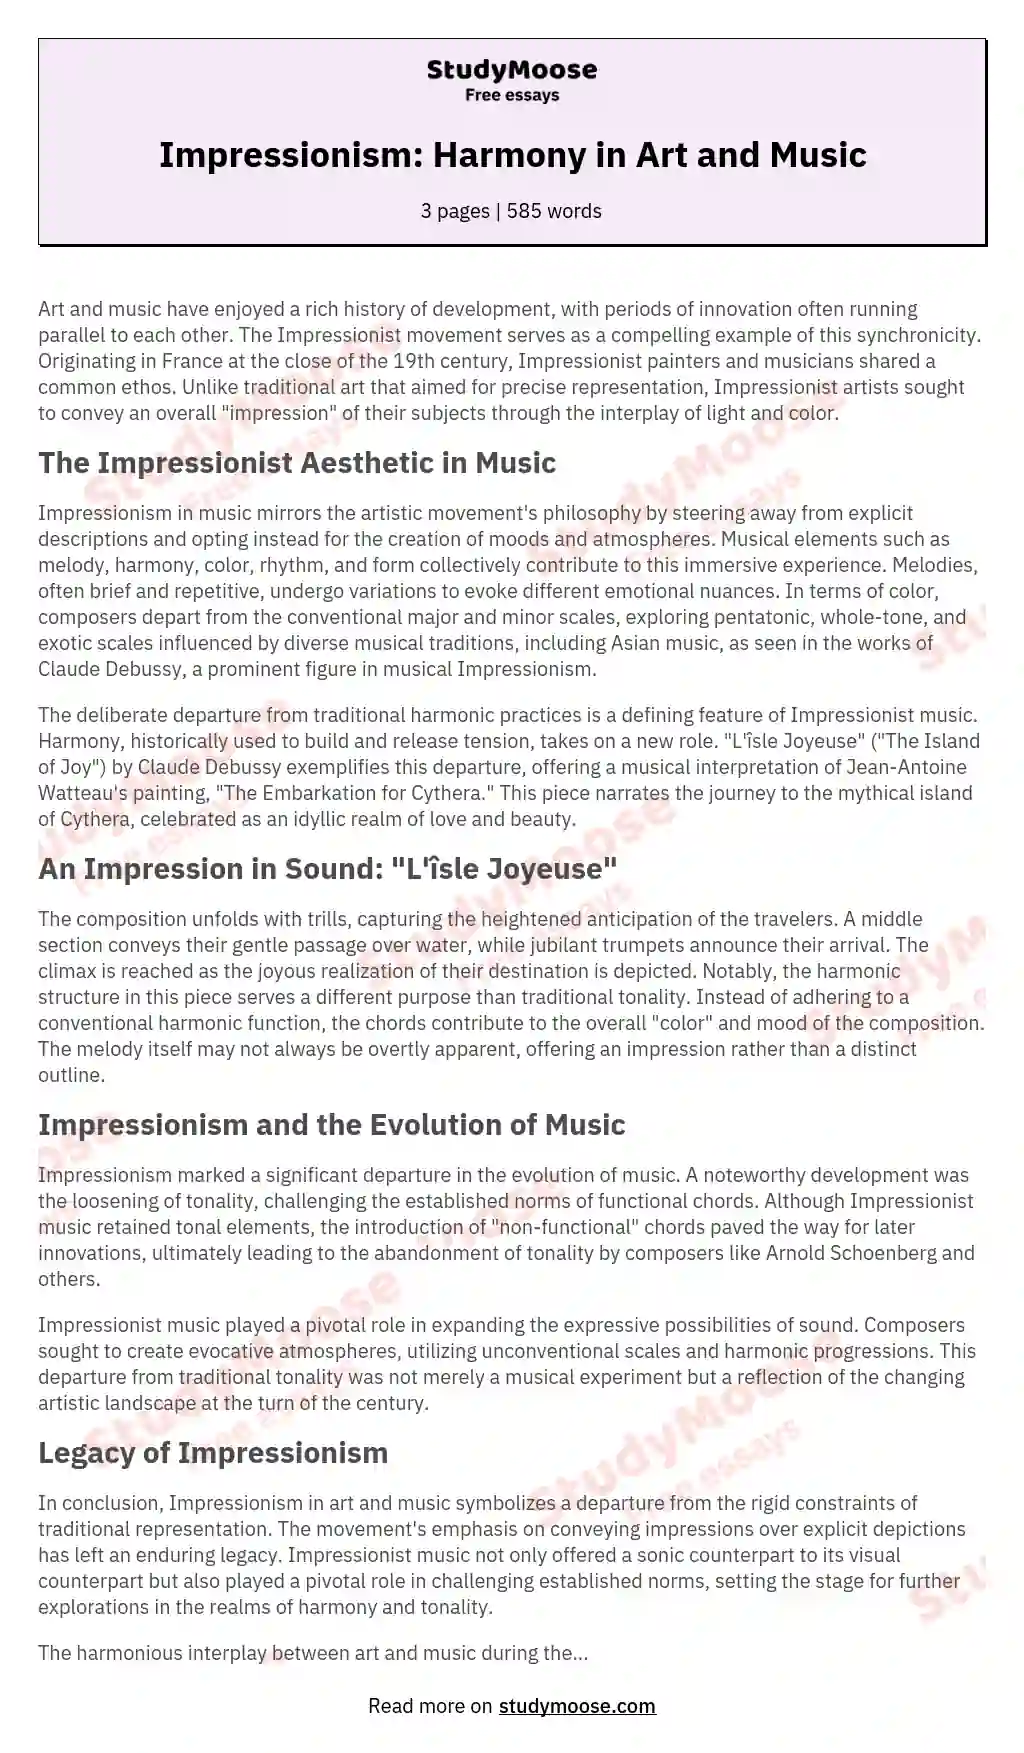 Impressionism: Harmony in Art and Music essay